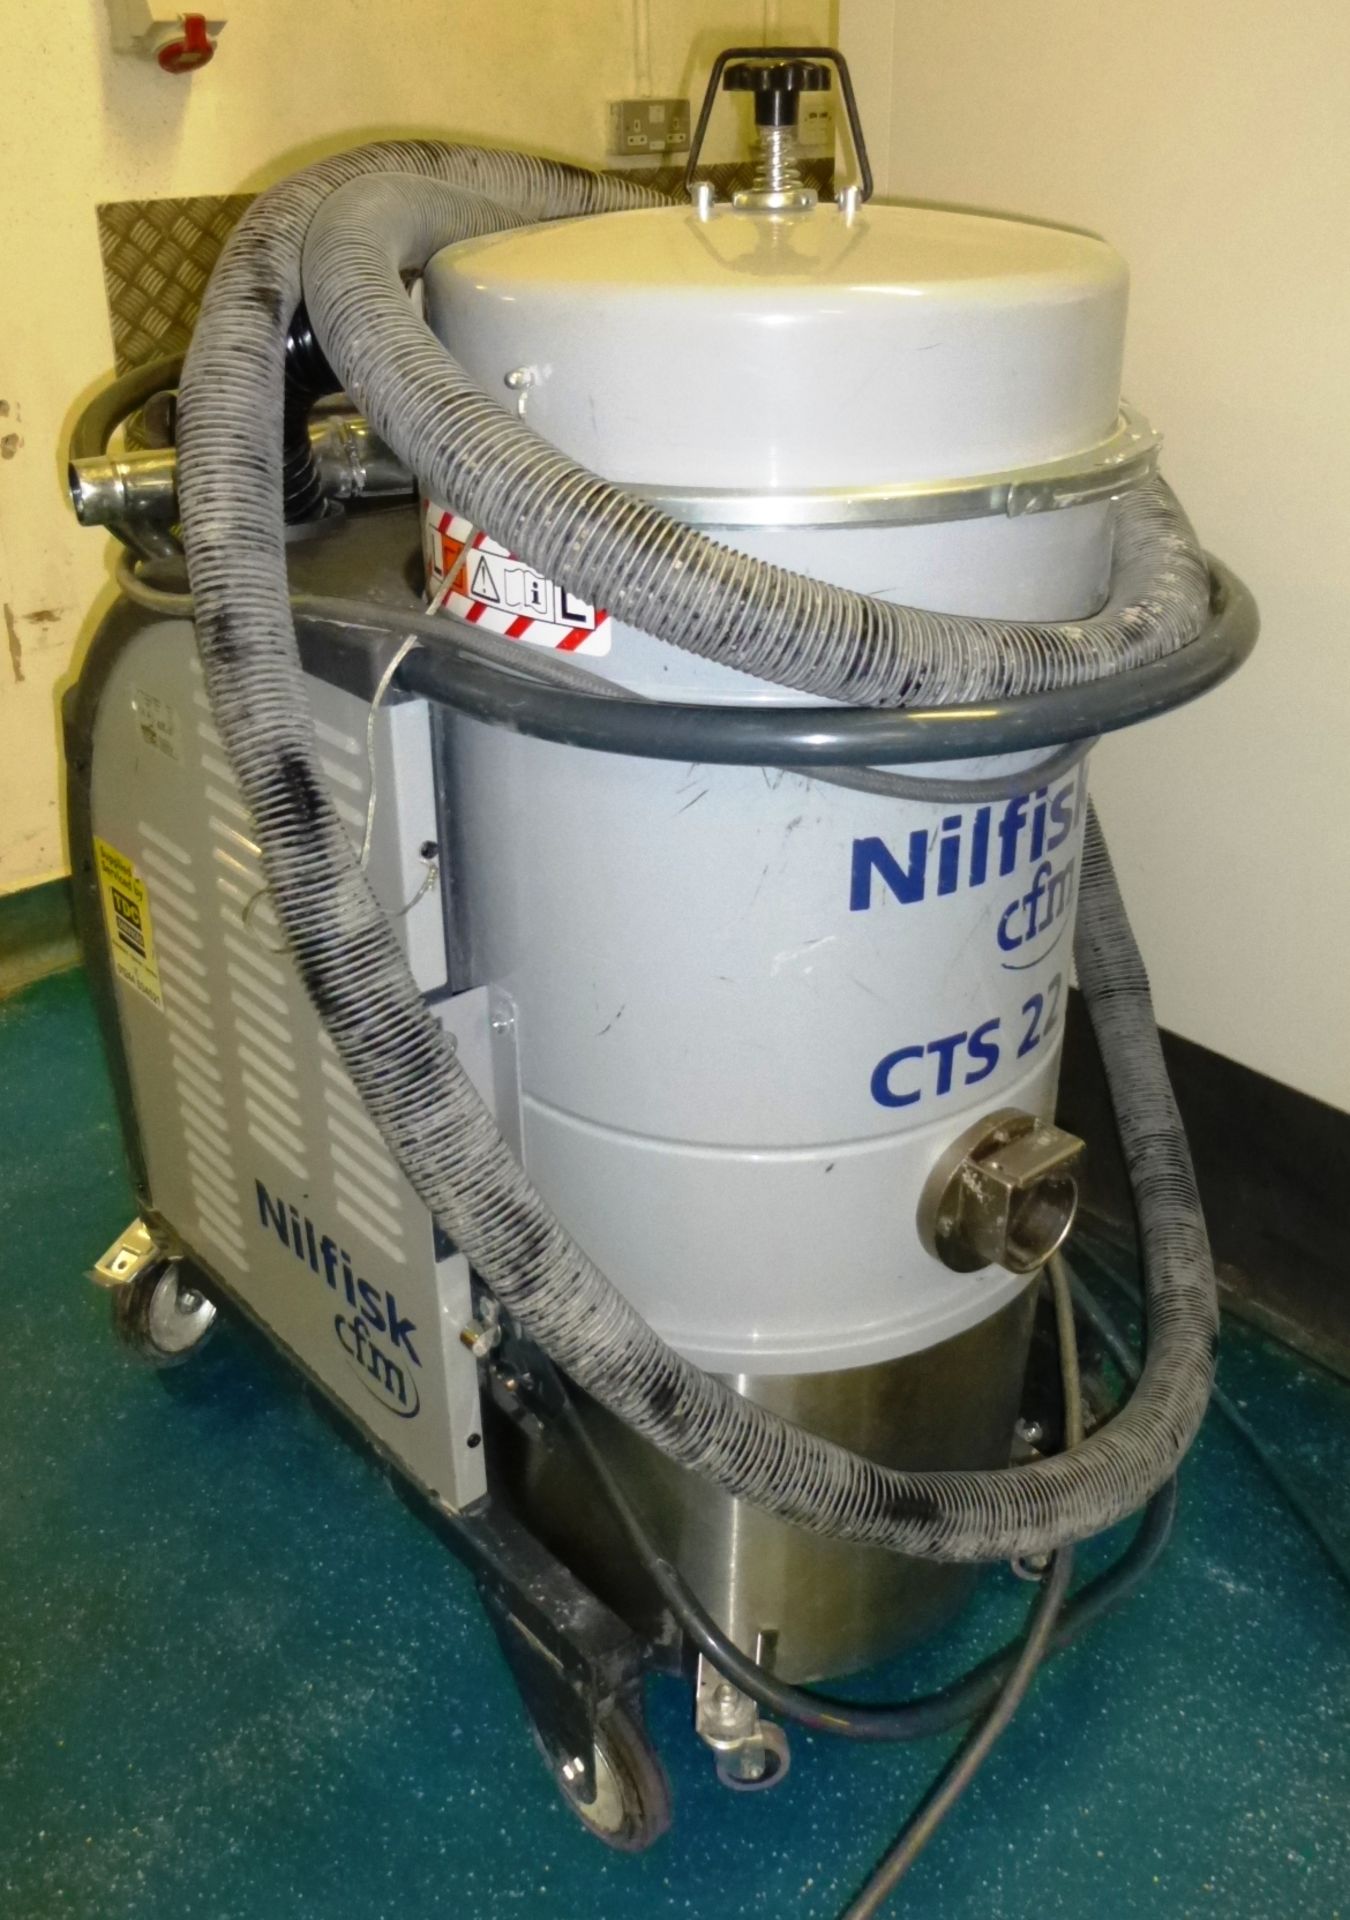 Nilfisk CTS22 Three Phase Industrial Vacuum Cleaner - Image 2 of 4